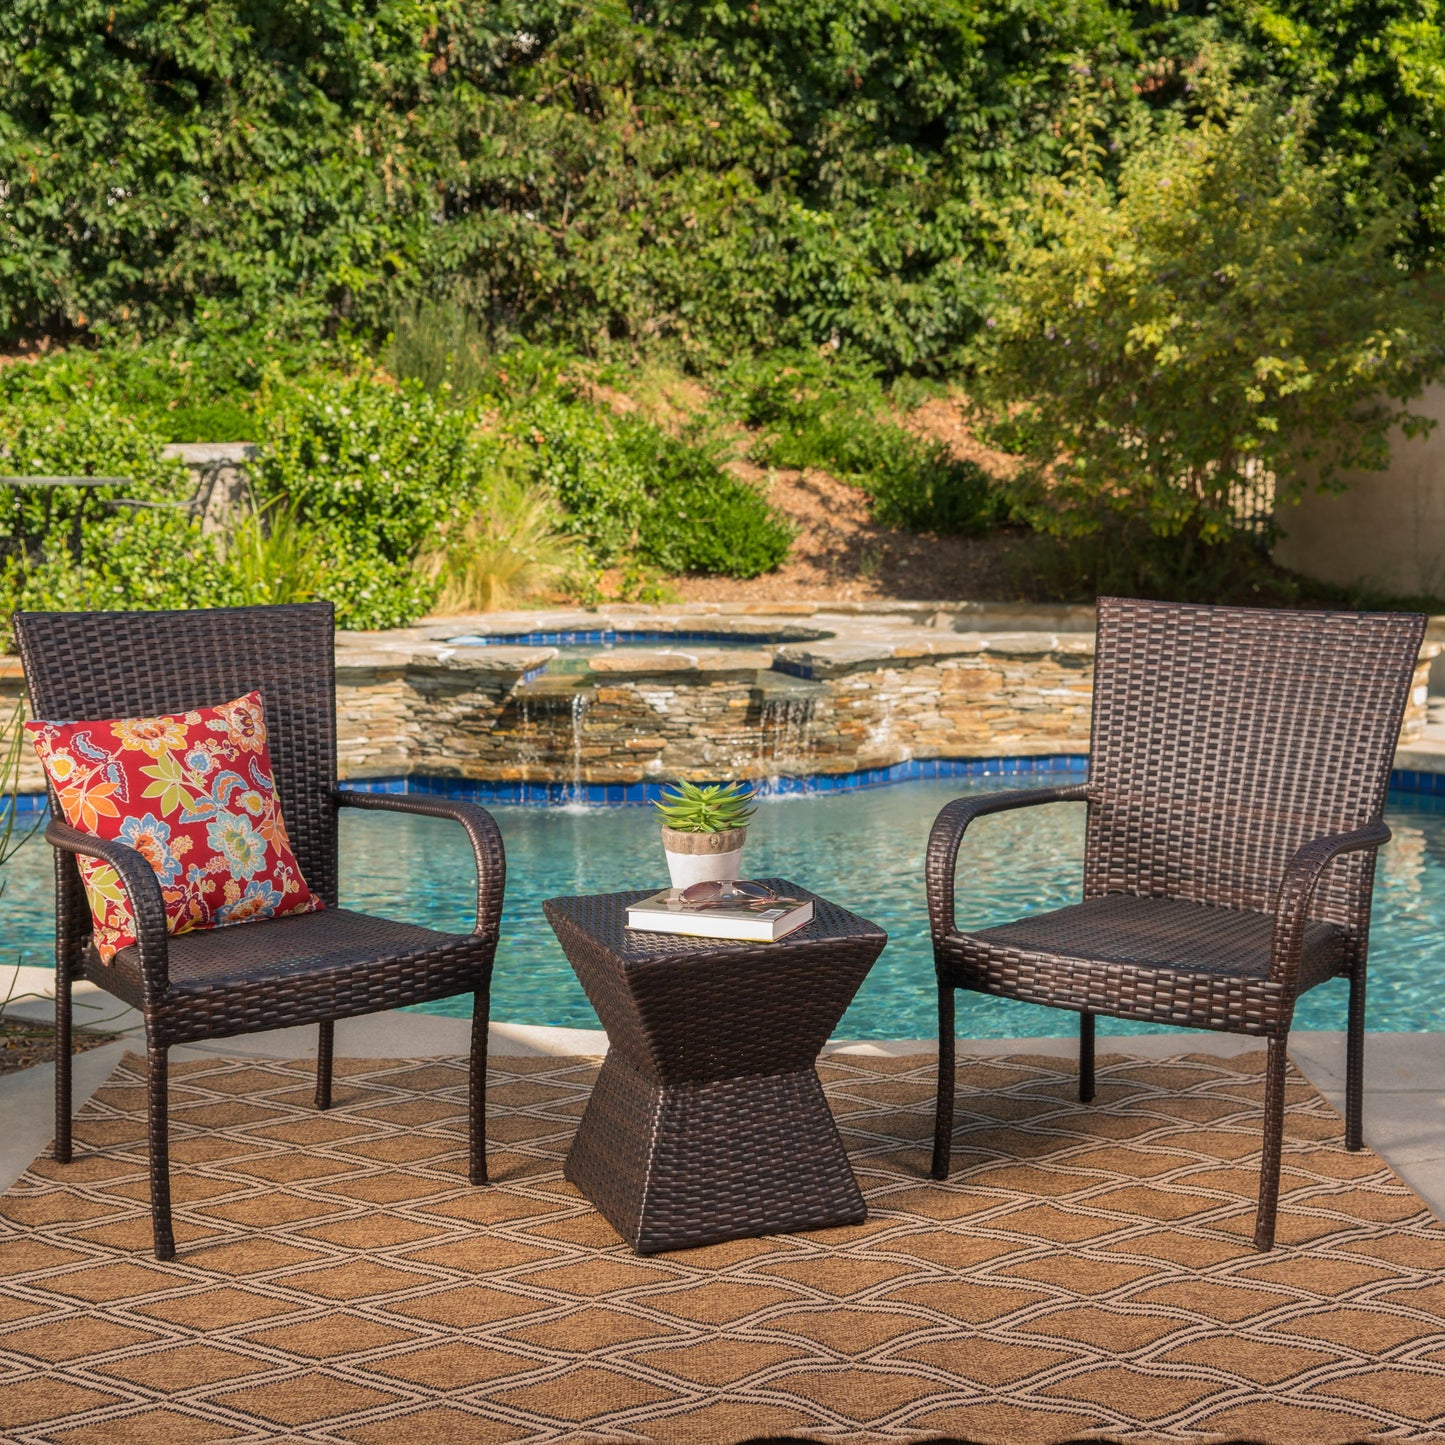 Bakerville Outdoor 3 Piece Multi-Brown Wicker Chat Set with Stacking Chairs